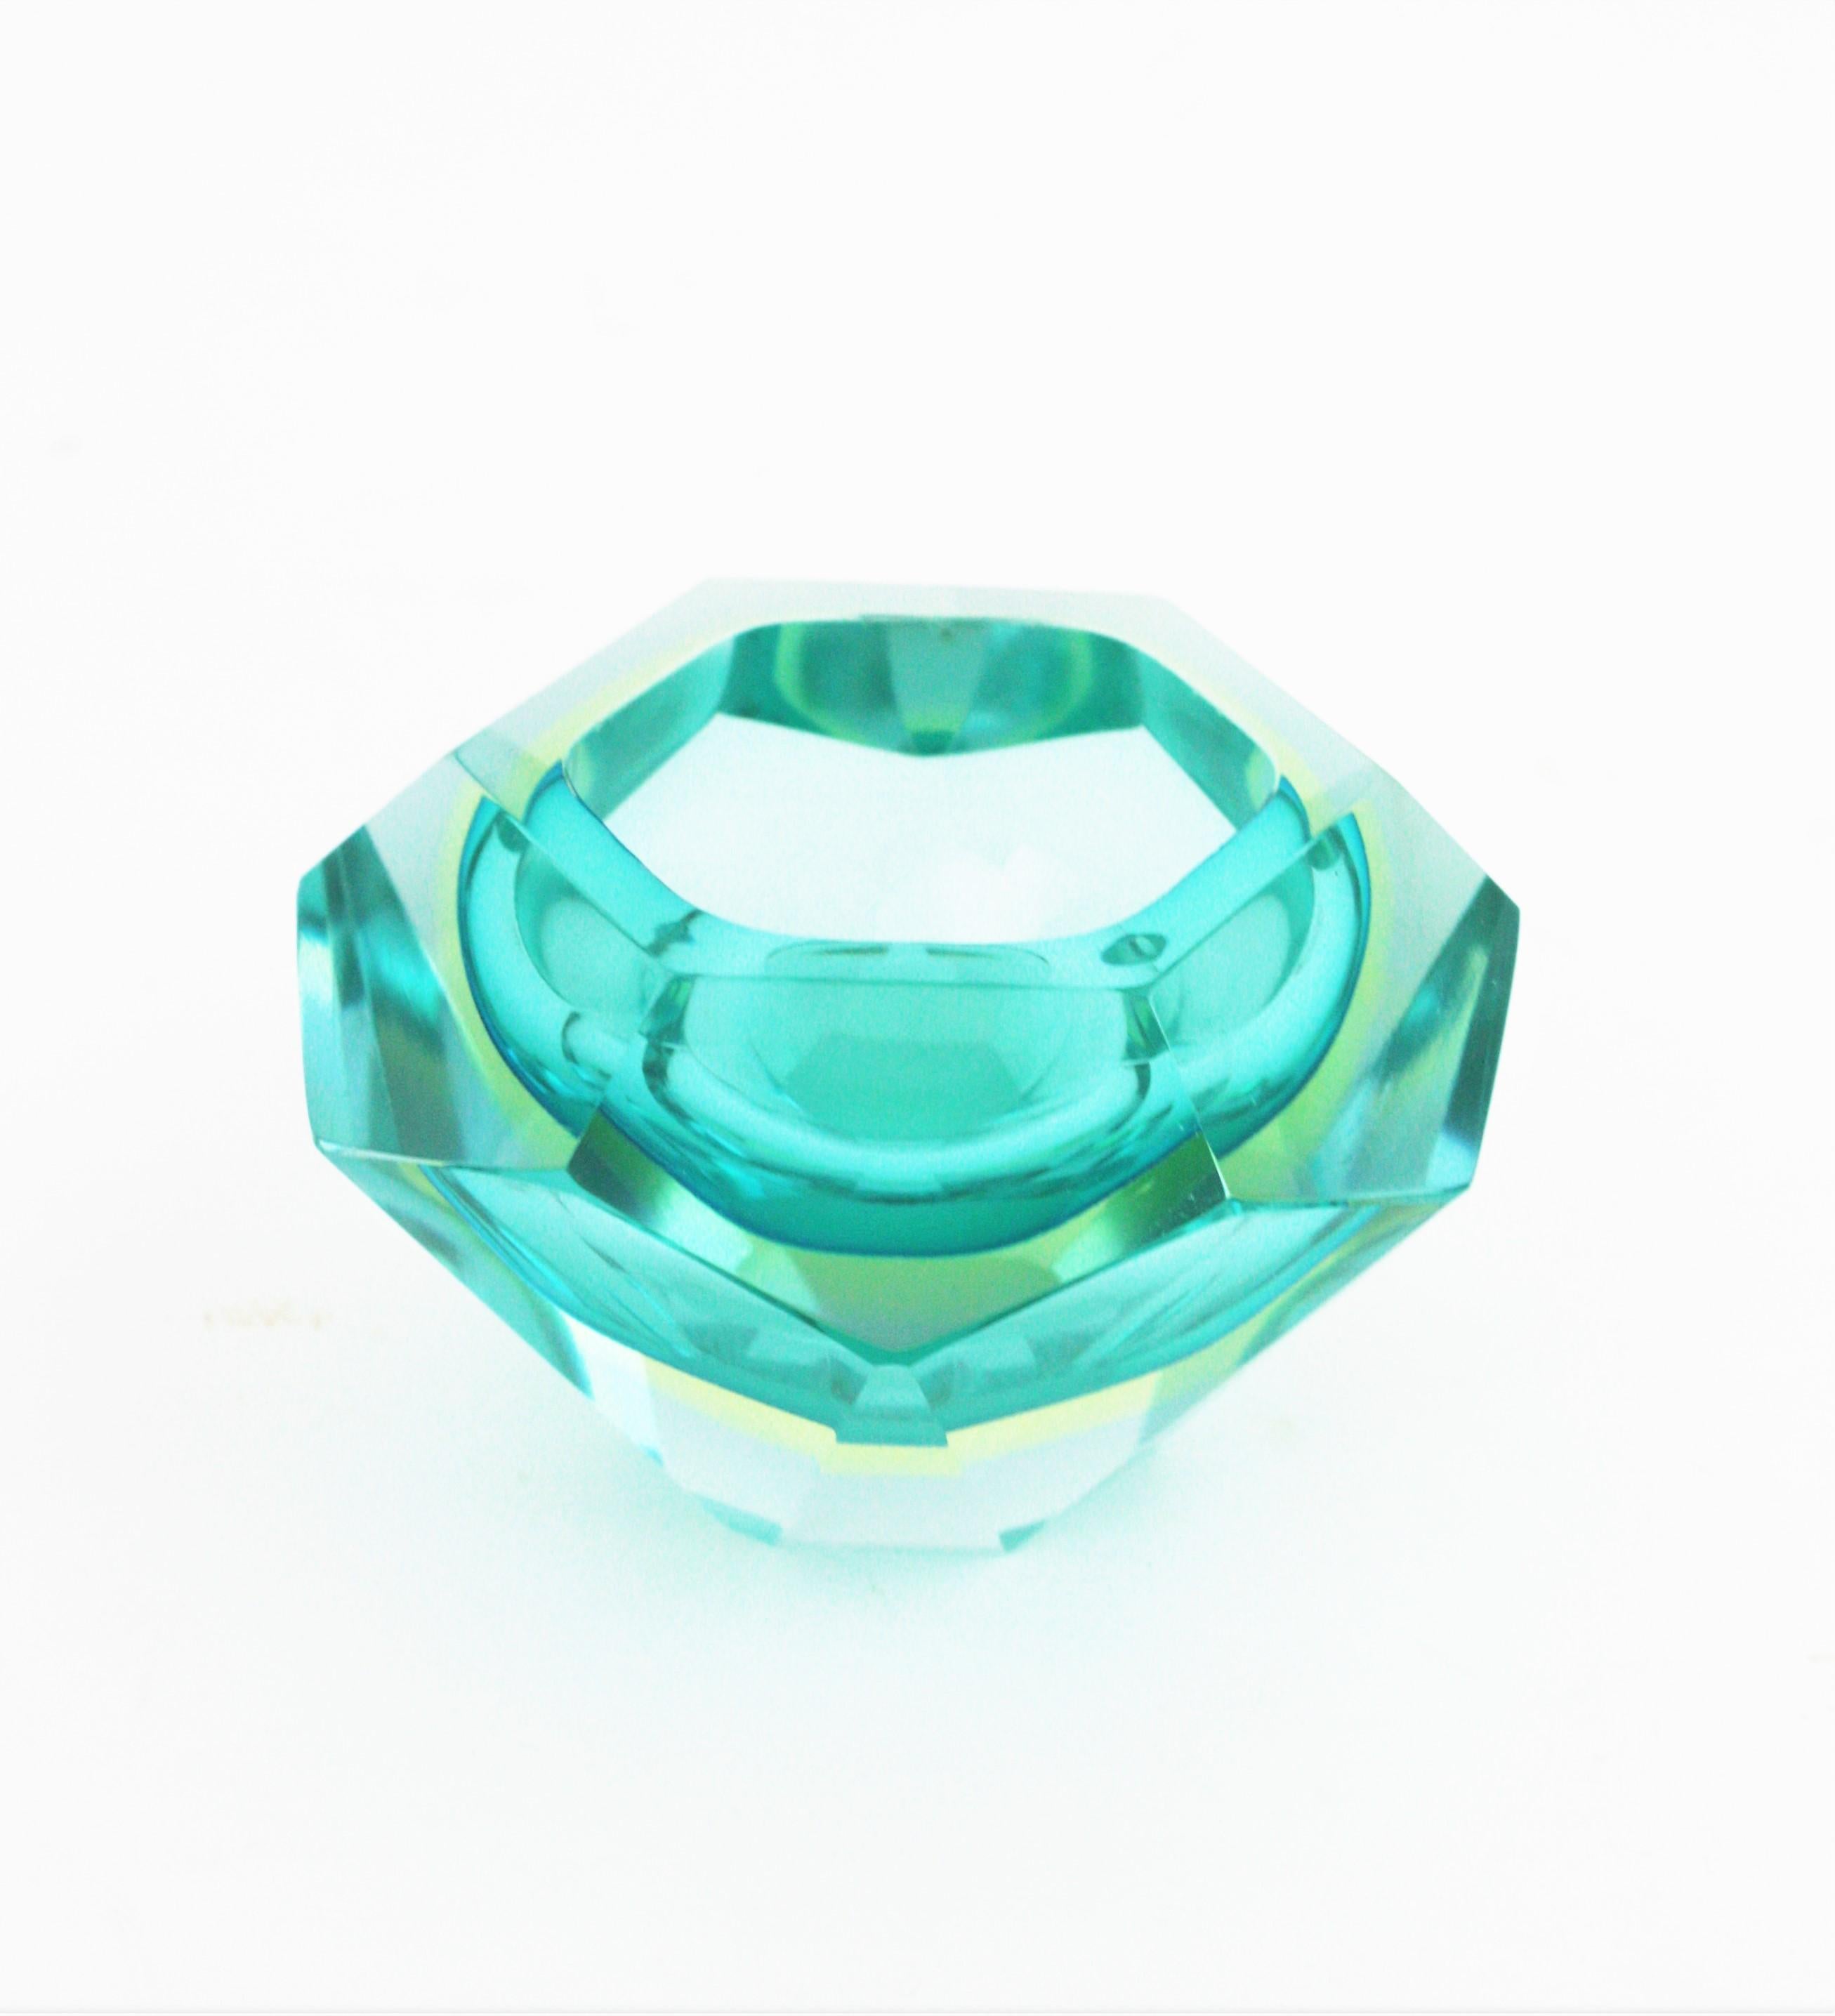 Flavio Poli Sommerso Turquoise Blue Yellow Diamond Faceted Murano Art Glass Bowl For Sale 7